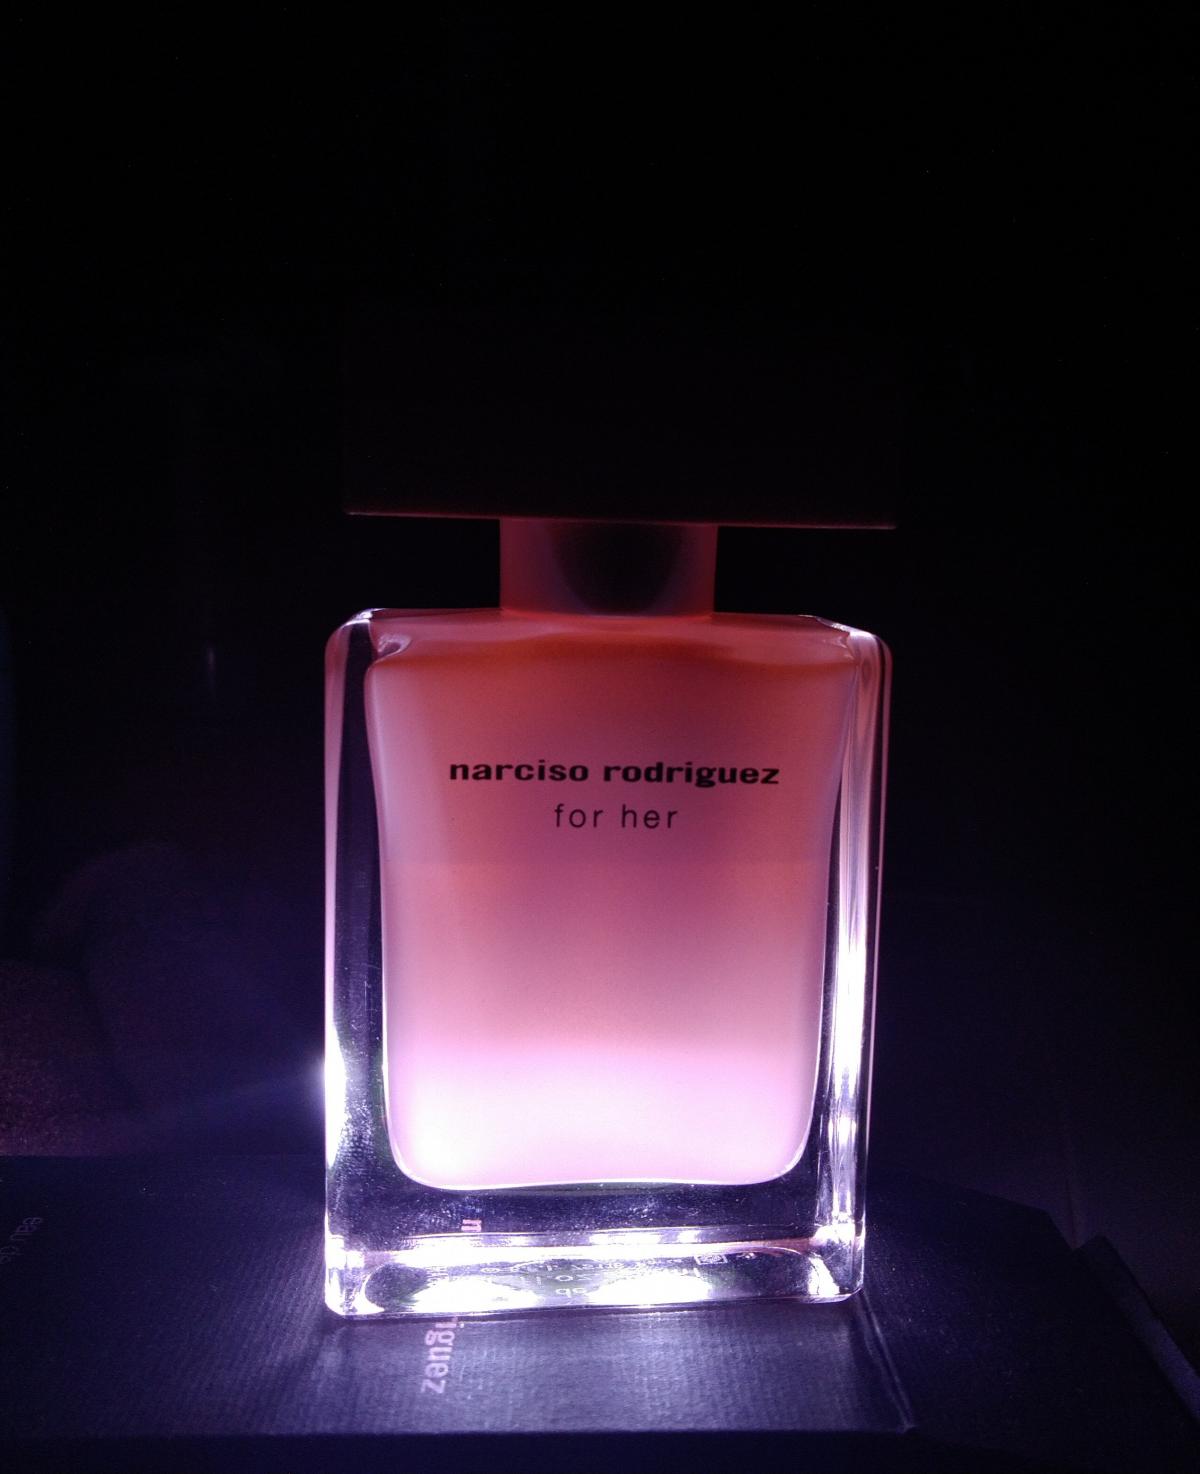 All of me narciso rodriguez. Narciso Rodriguez for her Eau de Parfum. Narciso Rodriguez for her EDP. Нарцисо Родригез амбре. Духи Родригес розовые.